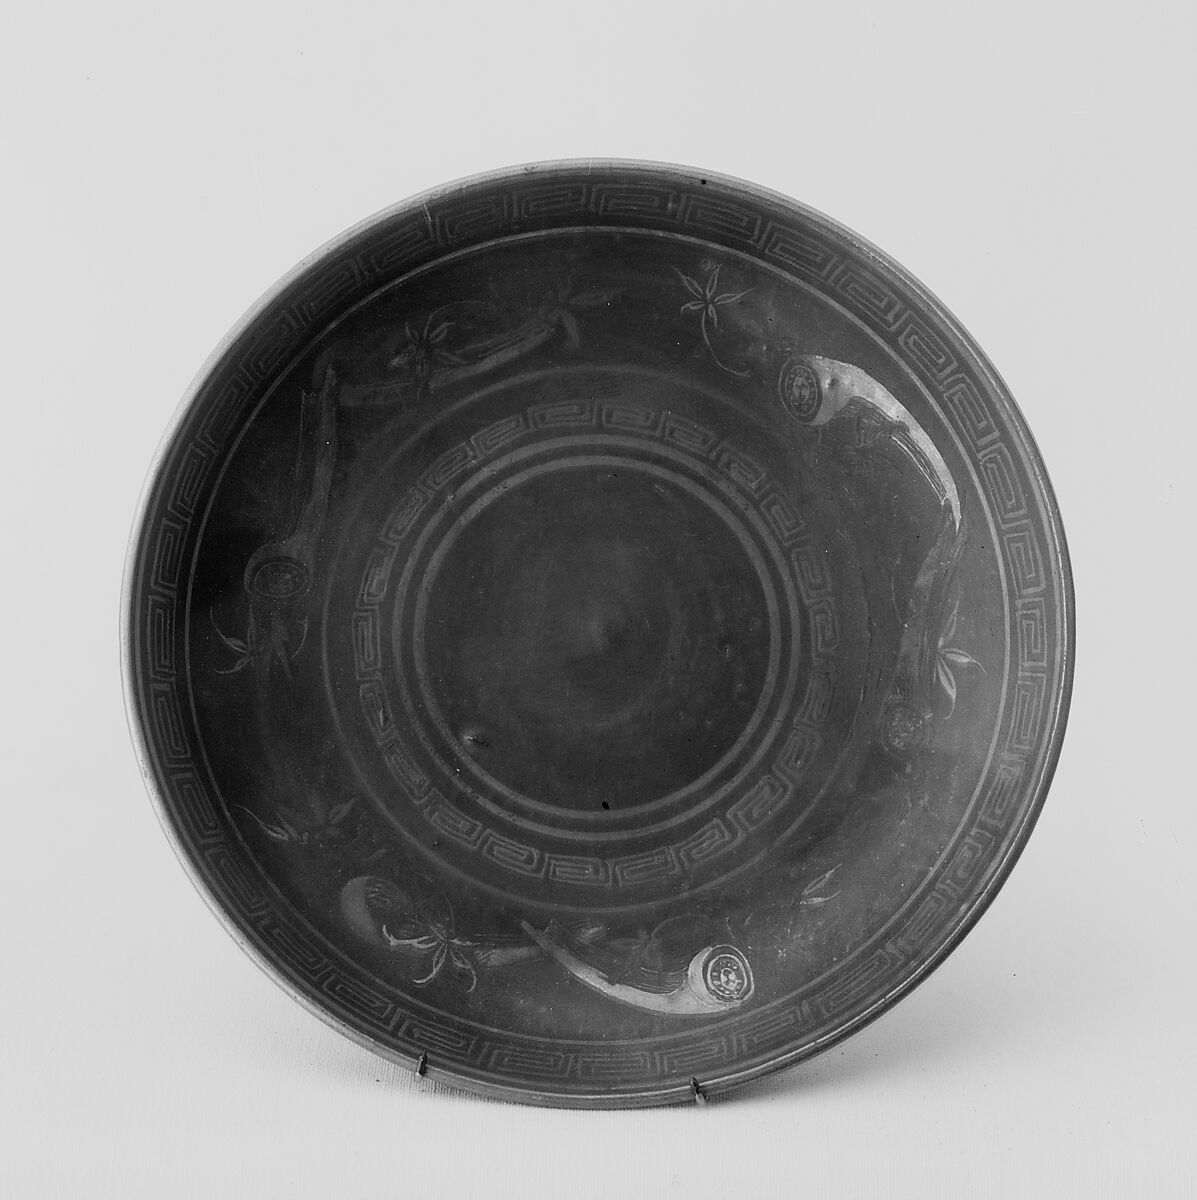 Saucer, White porcelain decorated with black, silver and gold (Hizen ware, Kutani type), Japan 